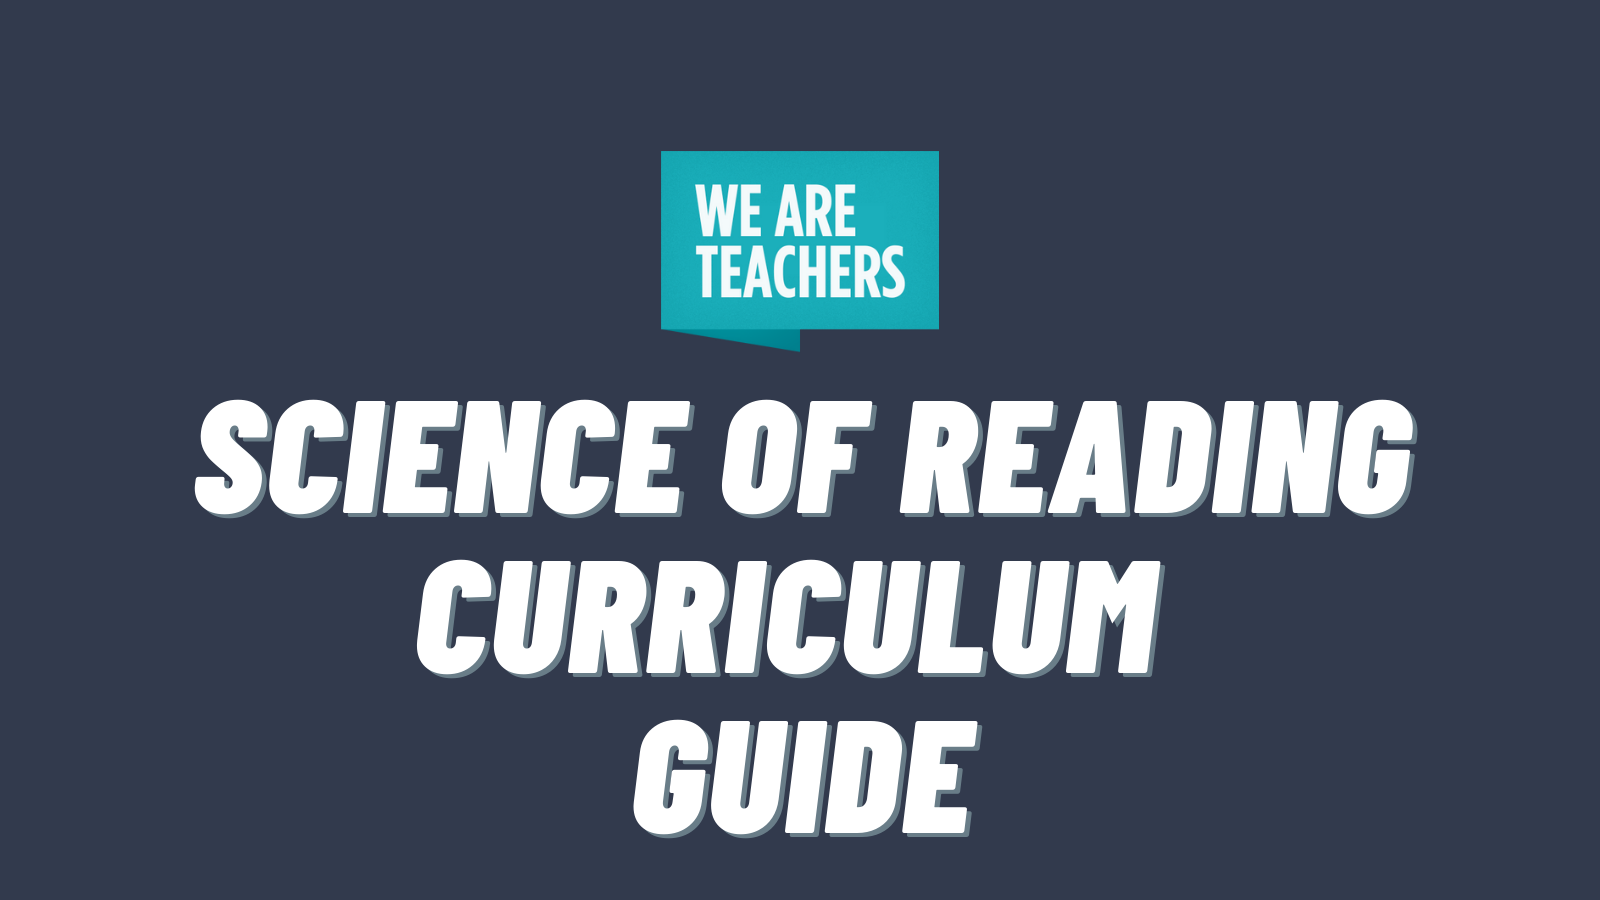 WeAreTeachers logo and text that says Science of Reading Curriculum Guide on dark gray background.